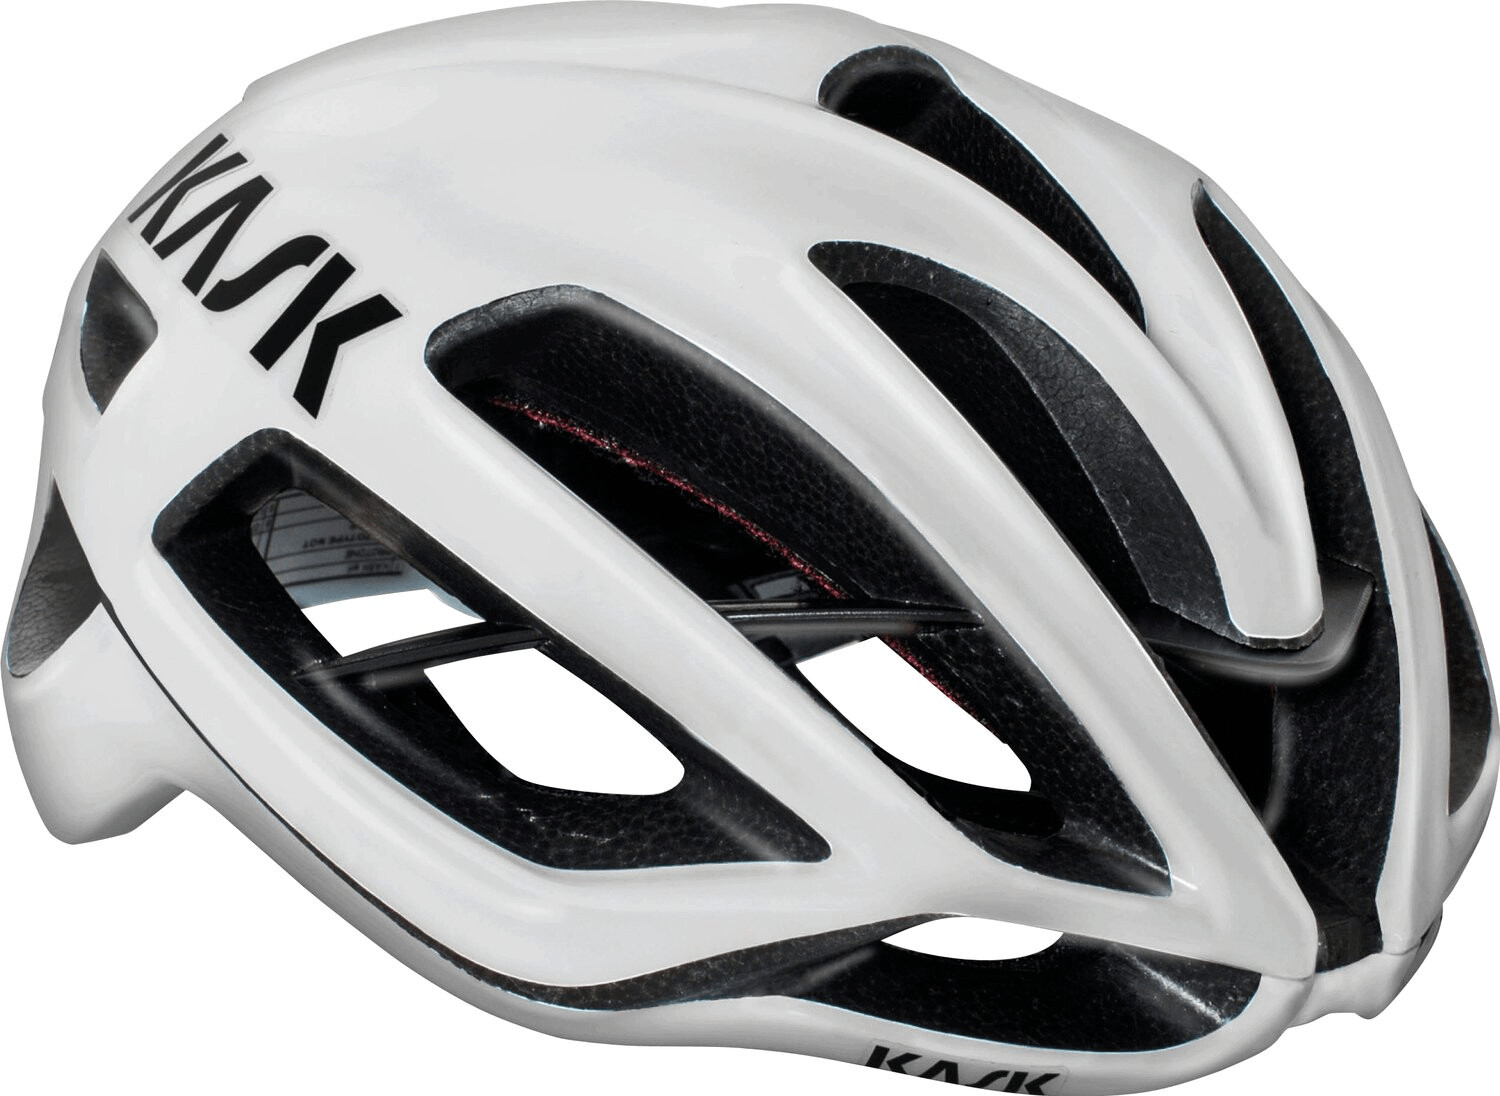 Buy Kask Protone from £85.00 (Today) – Best Deals on idealo.co.uk